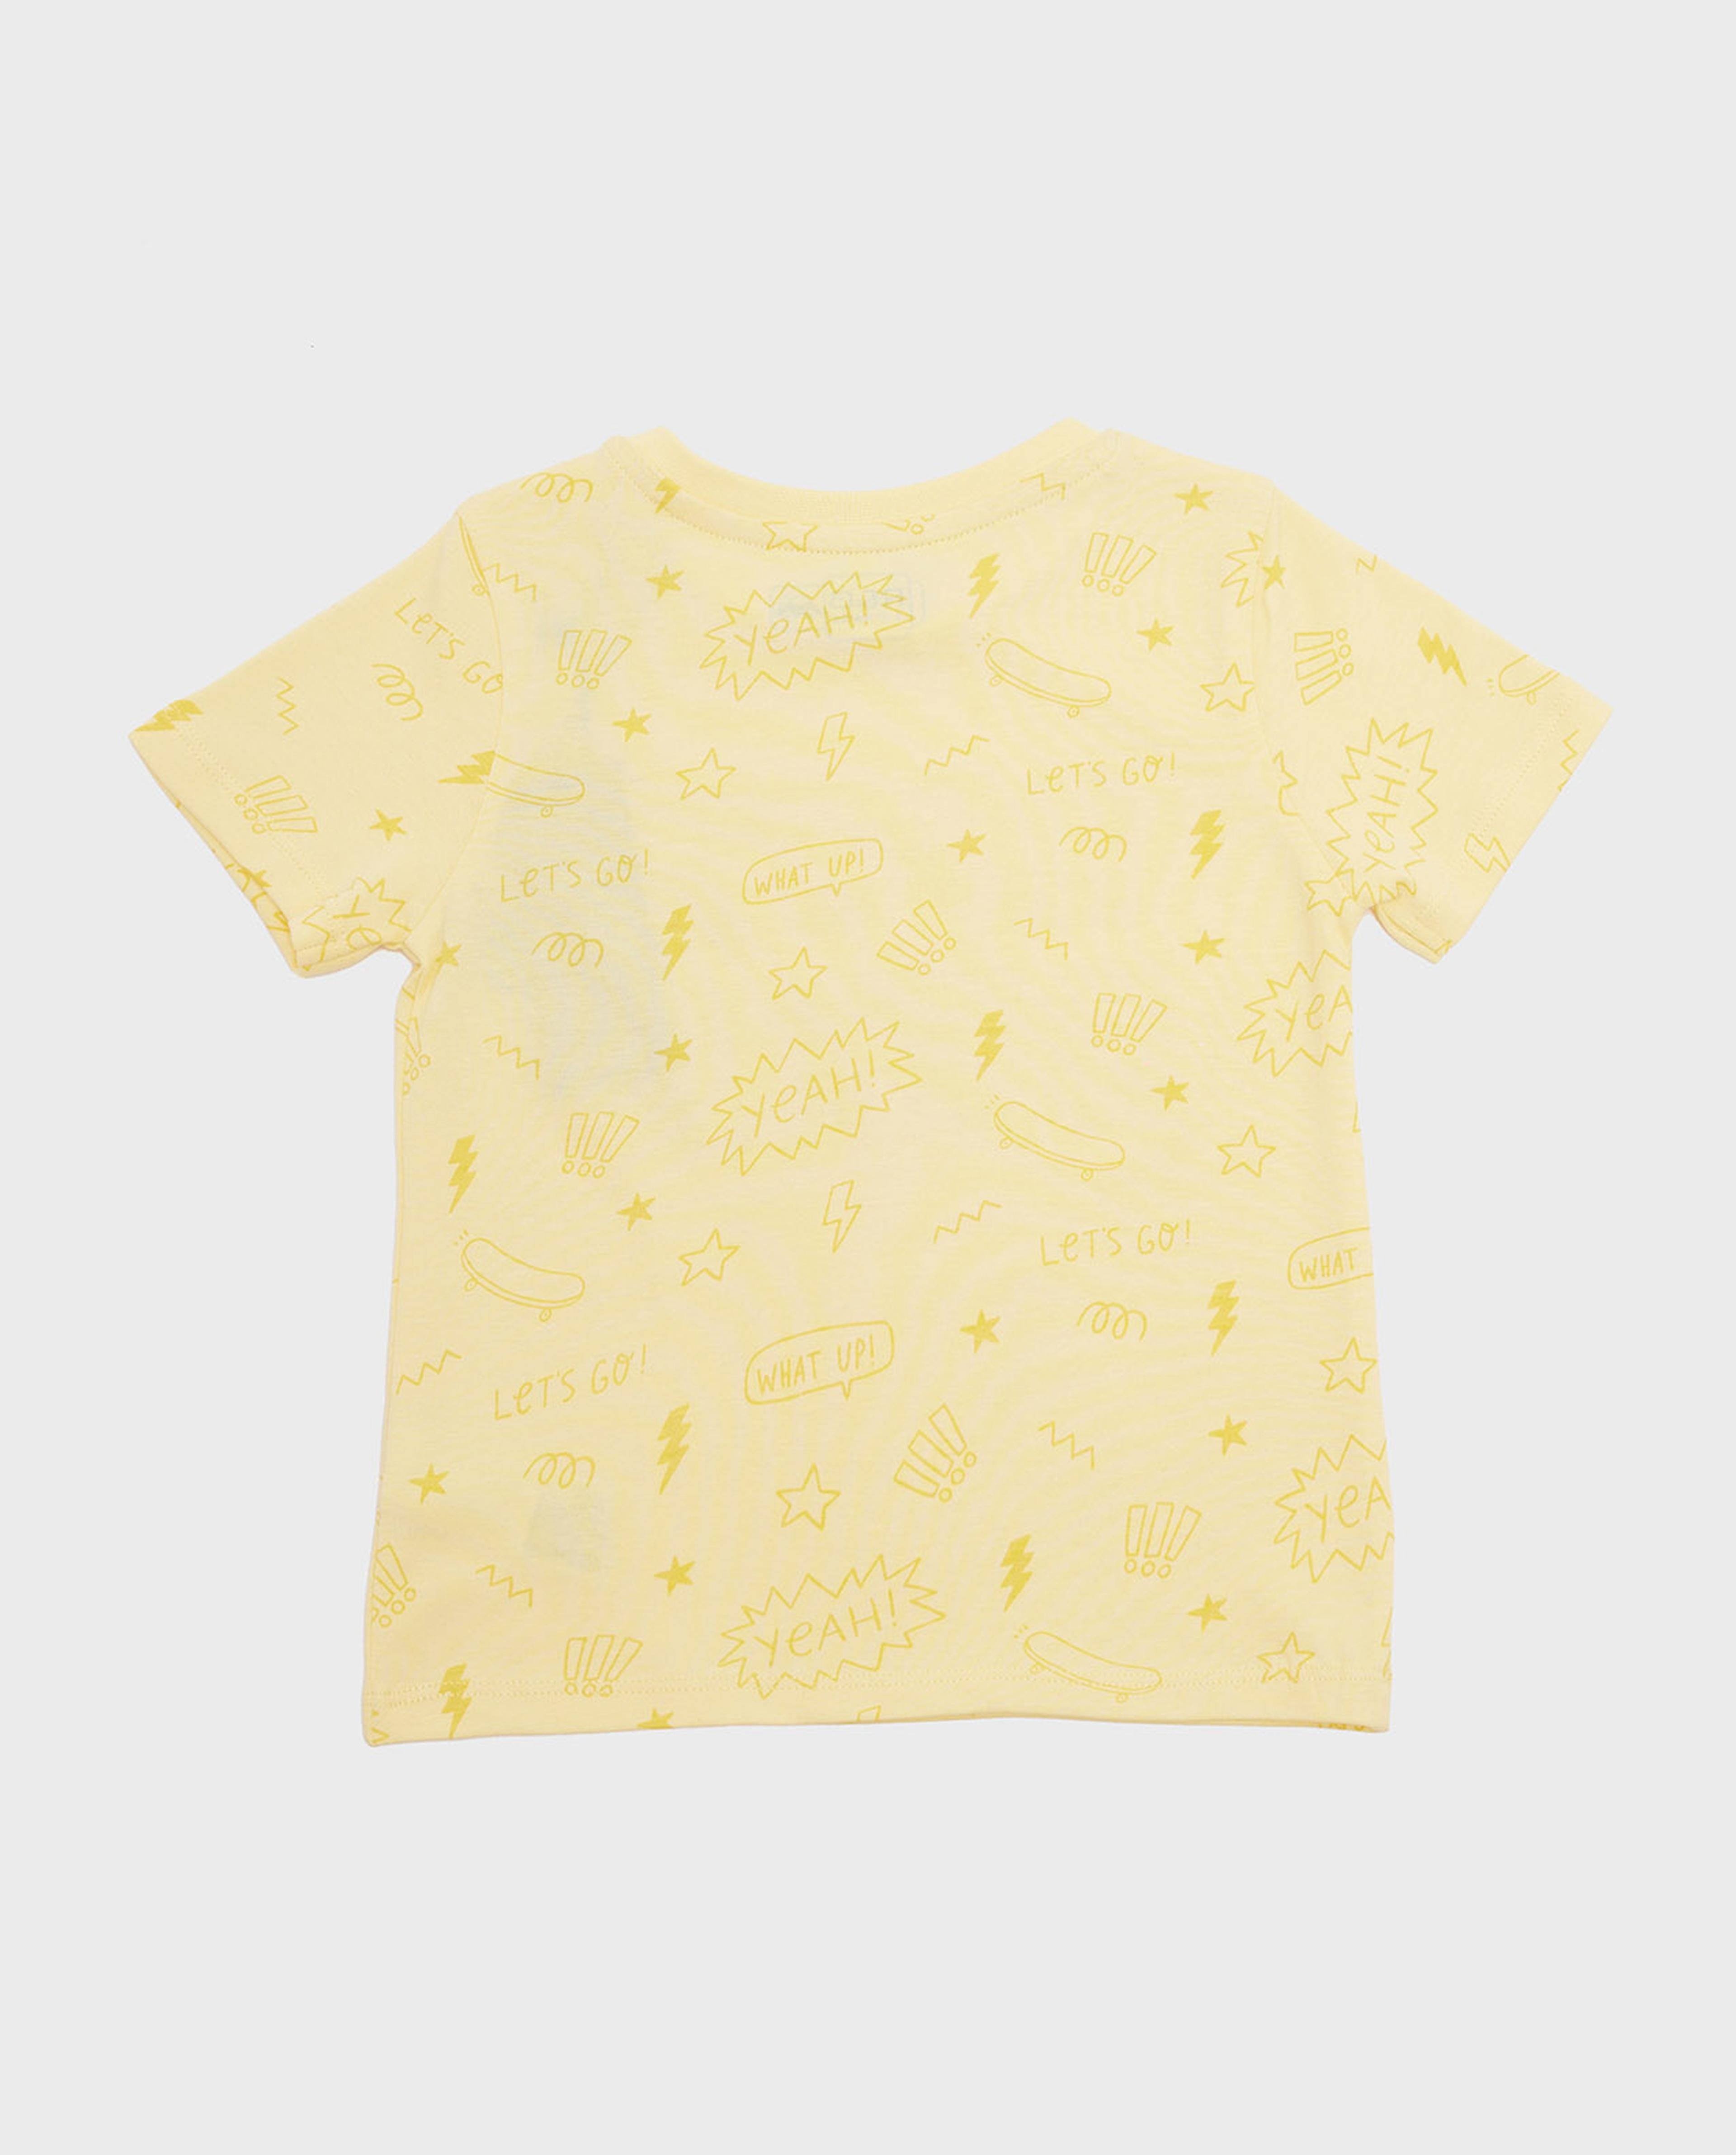 Printed T-Shirt with Crew Neck and Short Sleeves